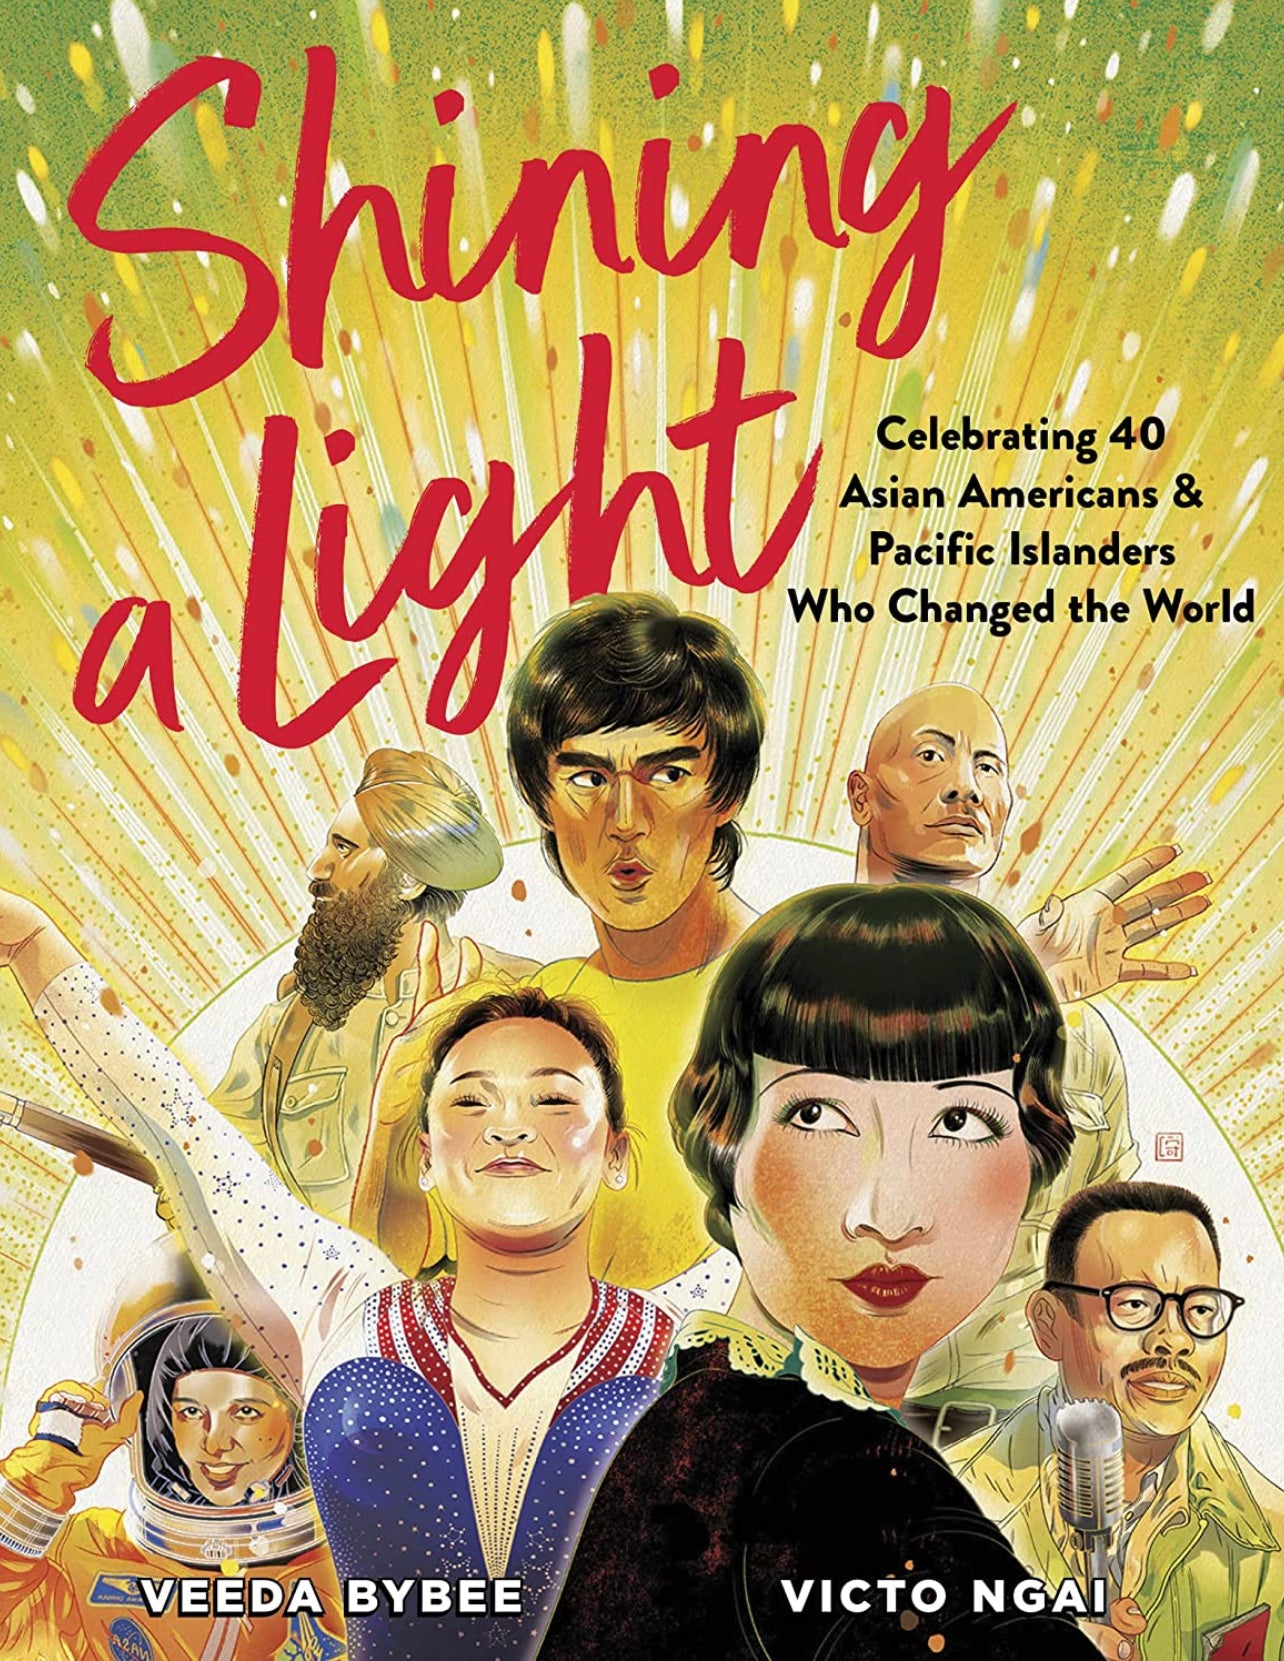 Shining A Light: Celebrating 40 Asian Americans & Pacific Islanders Who Changed the World